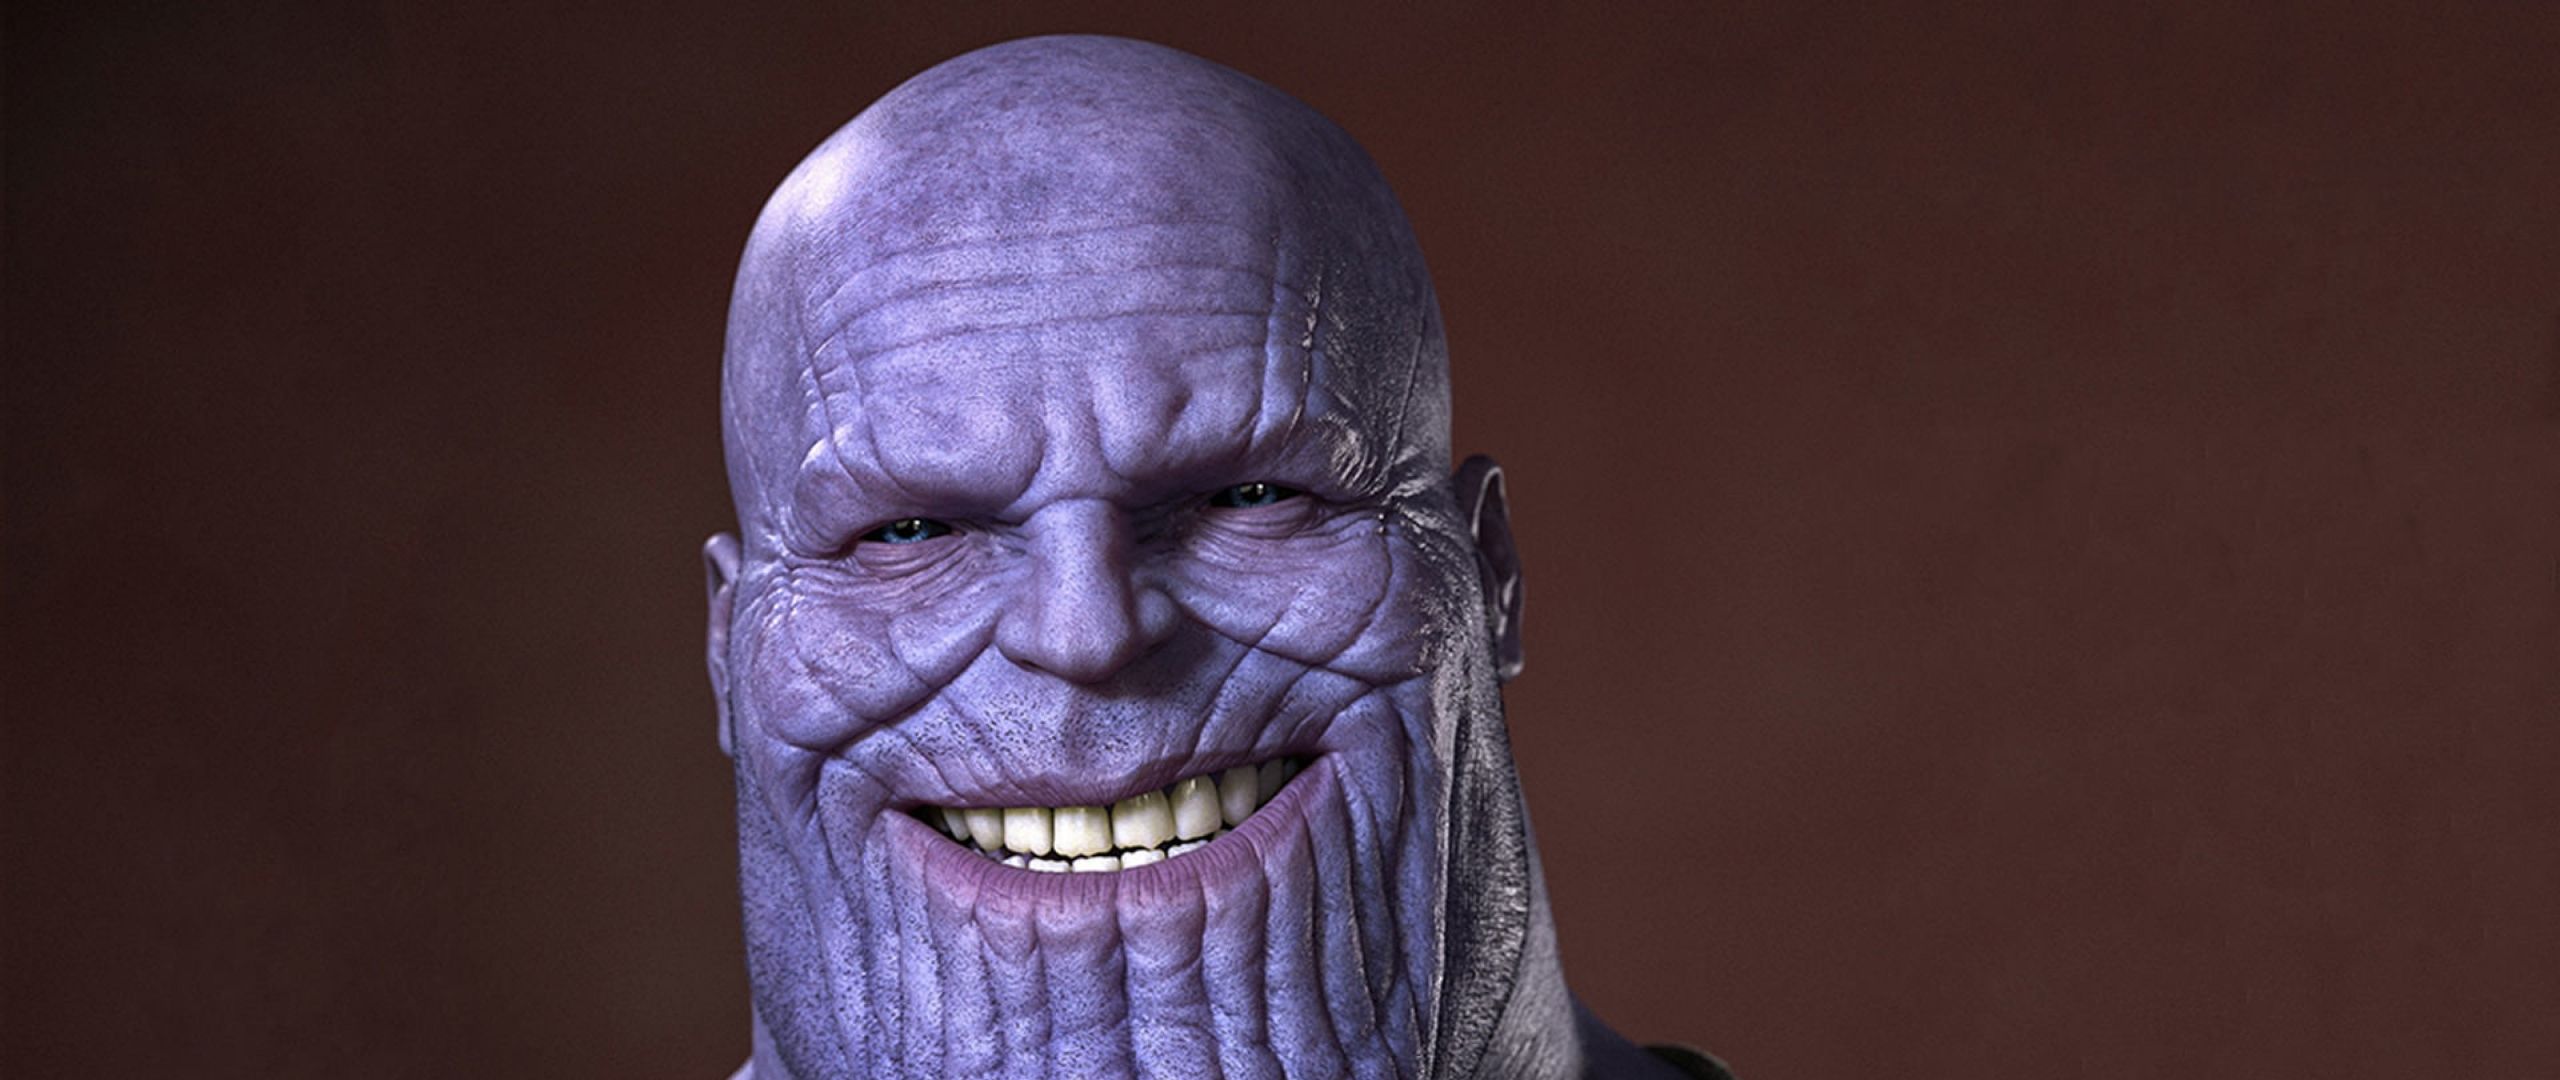 Download Ever Seen Thanos Smiling in Avengers 4? Dual Wide display 1080p wallpaper 2560x1080